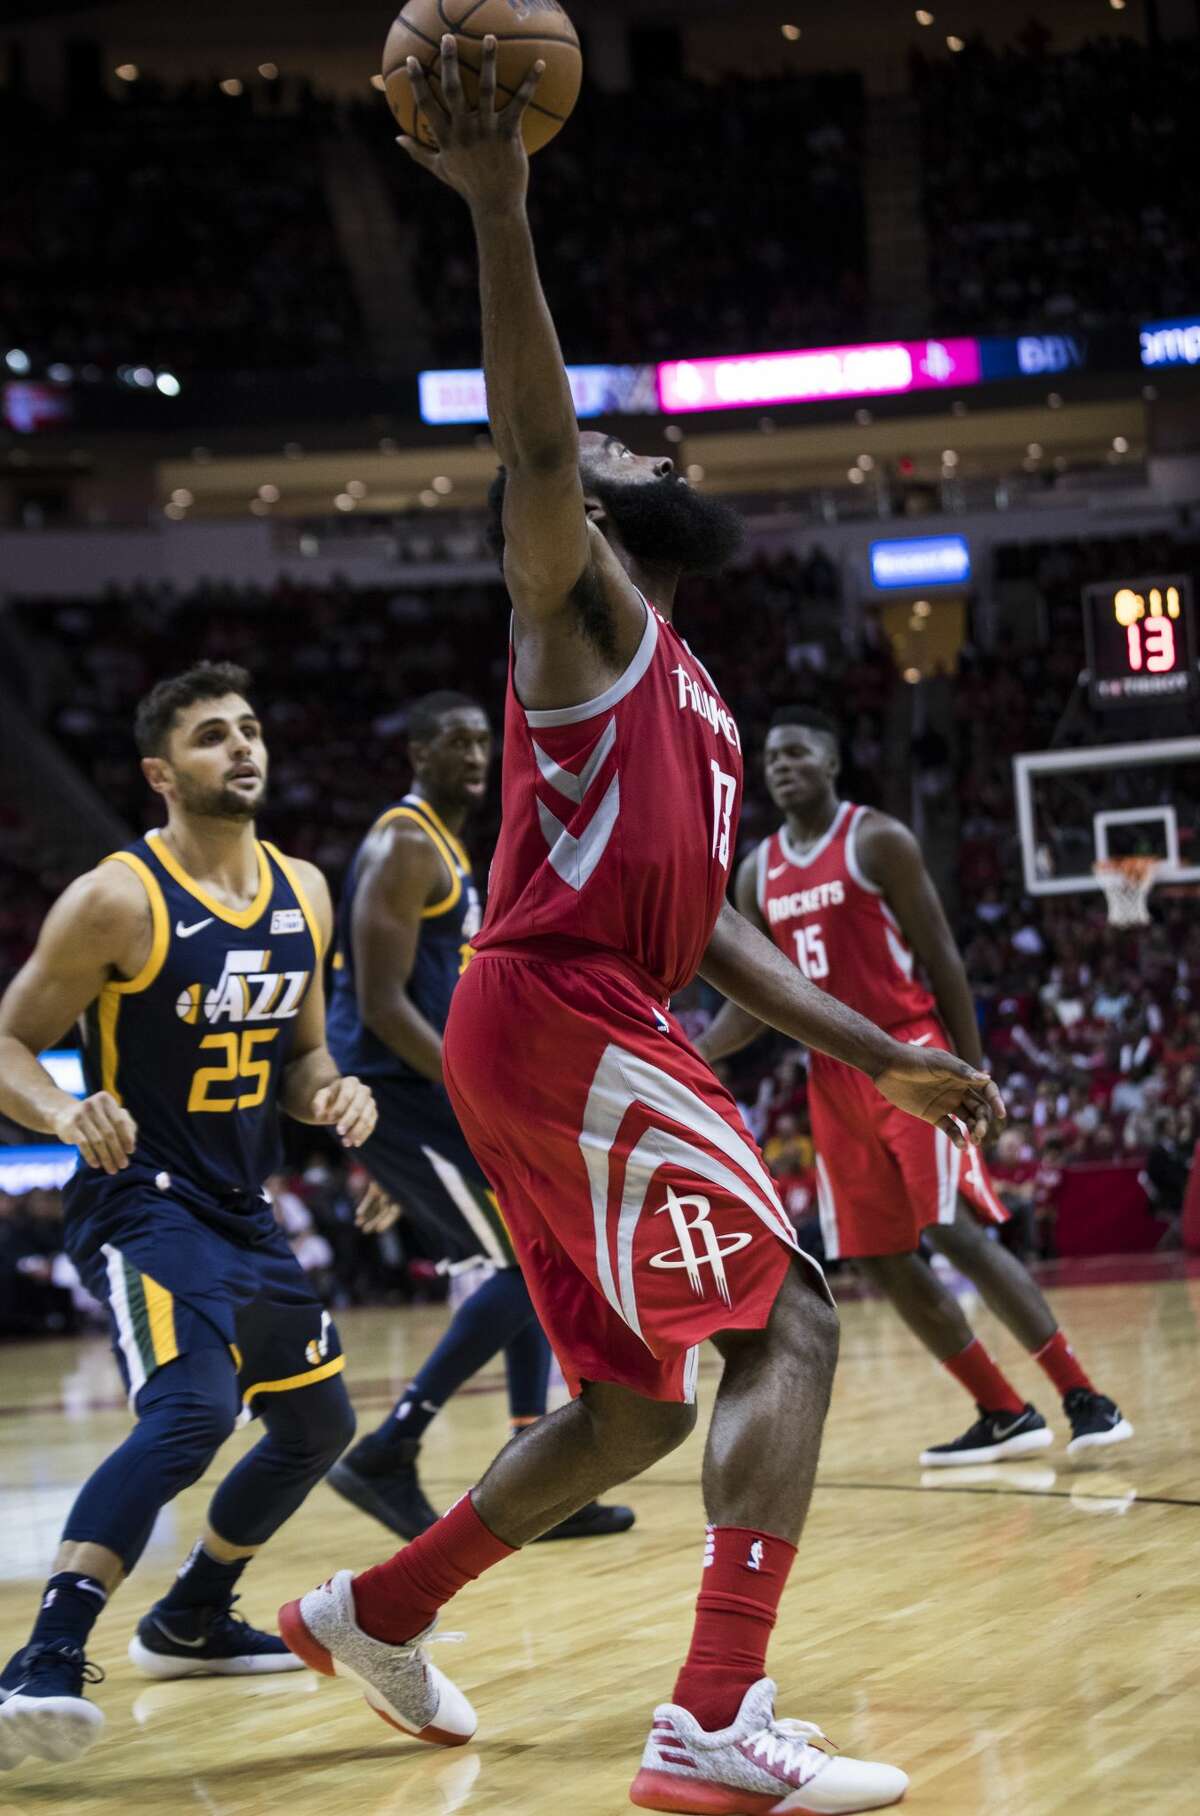 Houston Rockets guard James Harden (13) extends his arm to catch a pass during the game against the Utah Jazz on Sunday, Nov. 5, 2017, in Houston. The Rockets won 137-110 against the Utah Jazz. ( Marie D. De Jesus / Houston Chronicle )